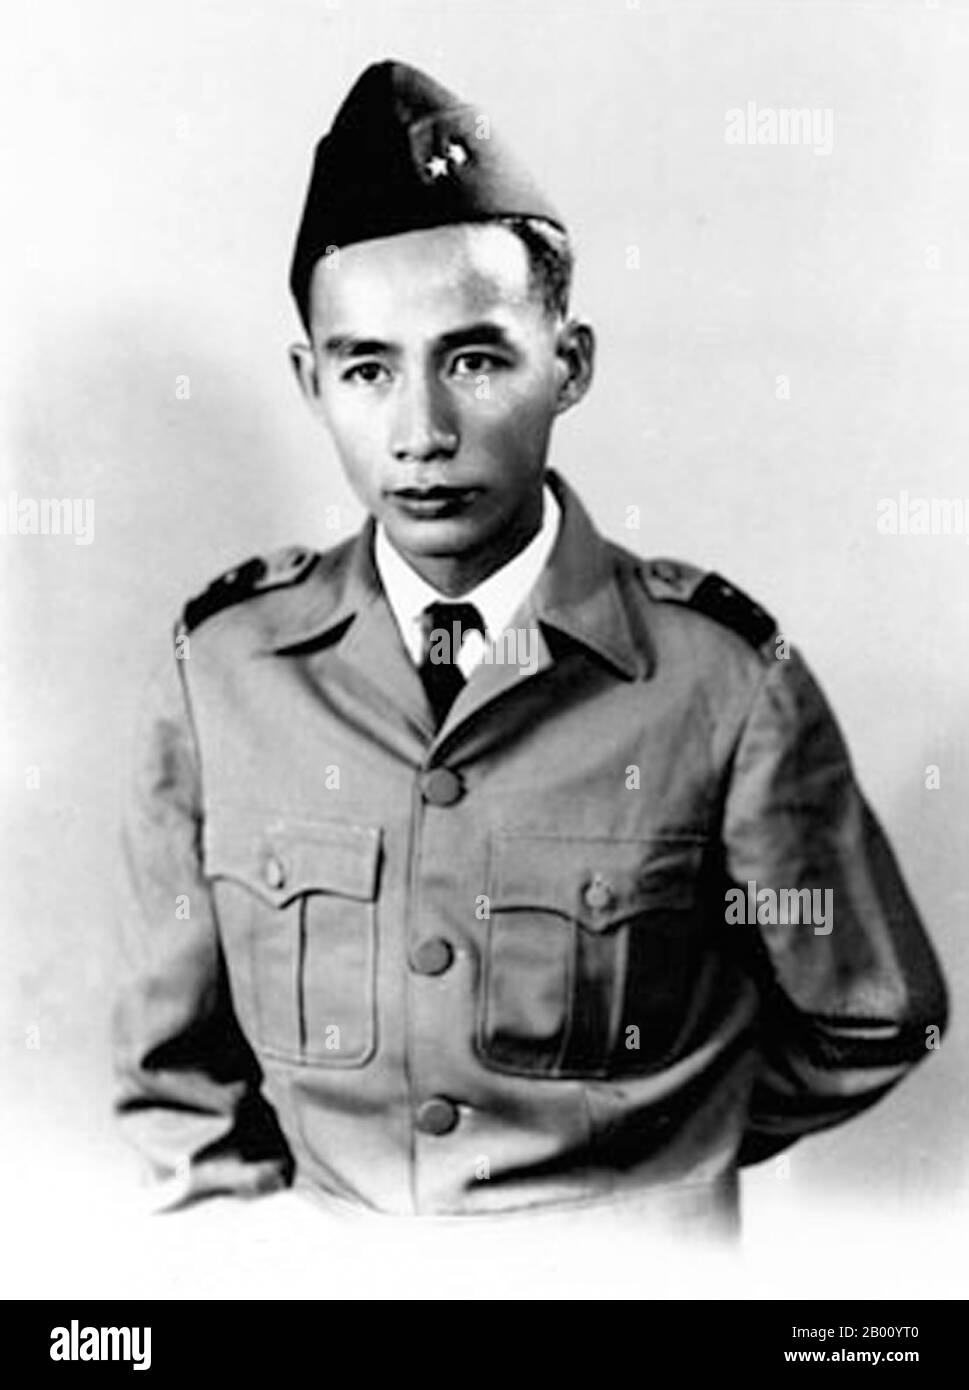 Vietnam: General The (Trinh Minh The, 1922-1955), nationalist, warlord and military leader during the latter stages of the First Indochina War.  The was born in Tay Ninh Province and raised in the Cao Dai religion. He was trained in military officer school by the Japanese Kempeitai when Japan began using Cao Dai paramilitary troops. By 1945 he was an officer in the Cao Dai militia. In June 1951, The broke from the Cao Dai hierarchy and took about two thousand troops with him to form his own militia, the Lien Minh, devoted to combating both the French and the Viet Minh. Stock Photo